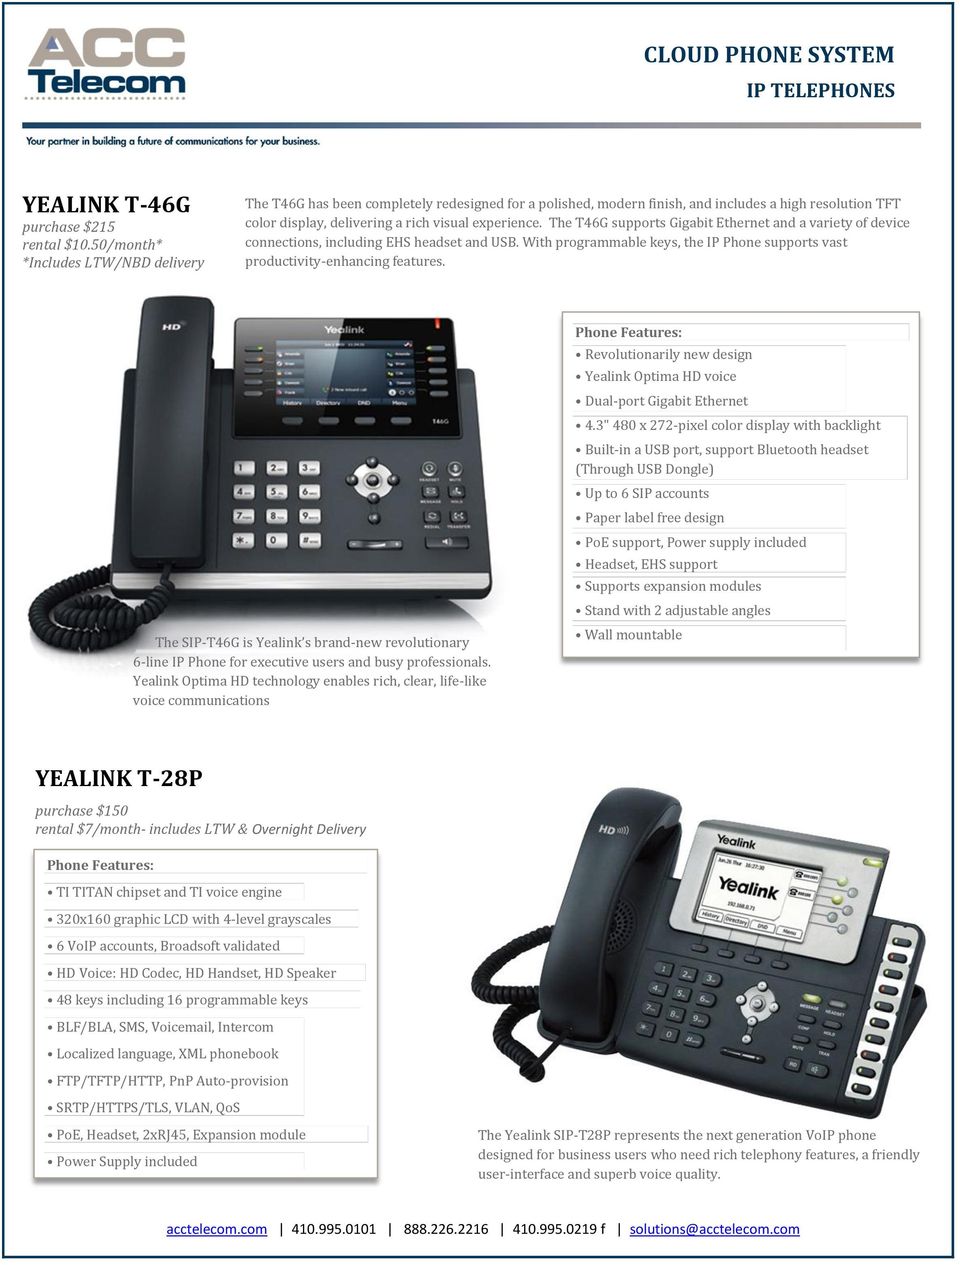 The T46G supports Gigabit Ethernet and a variety of device connections, including EHS headset and USB. With programmable keys, the IP Phone supports vast productivity-enhancing features.